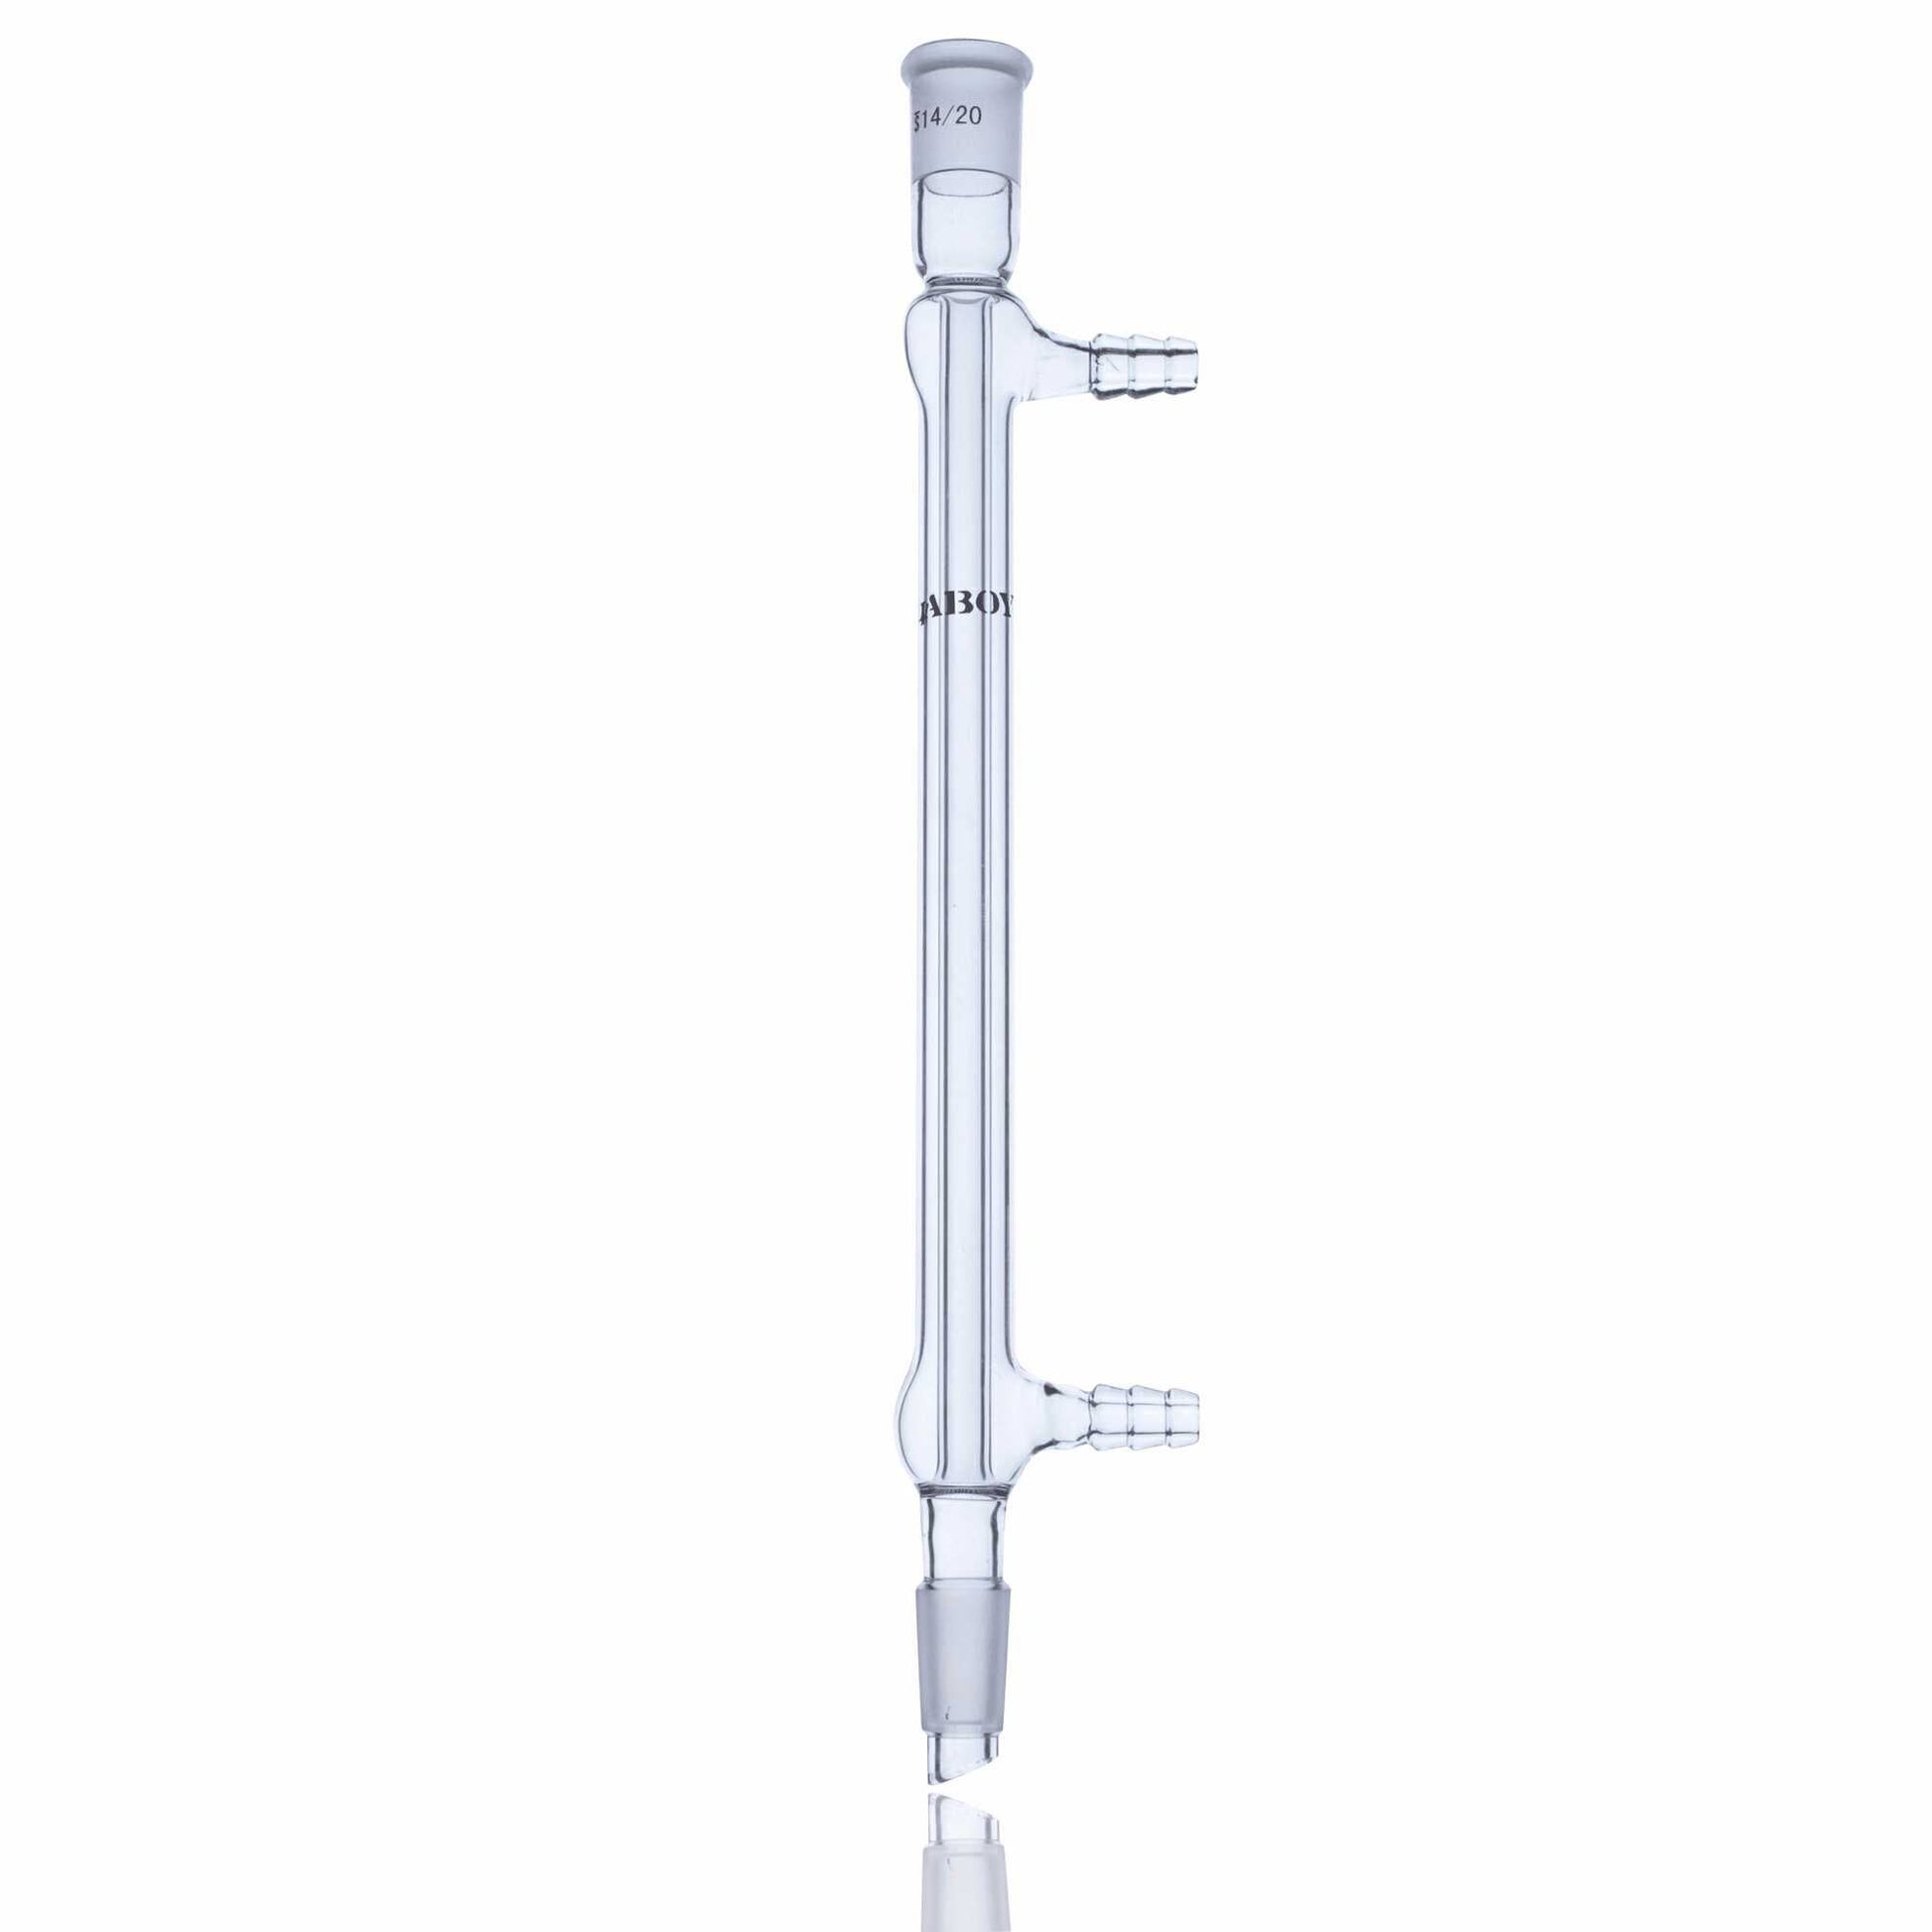 Glass West Condenser With Standard Taper Joint and Hose Connections - Scienmart